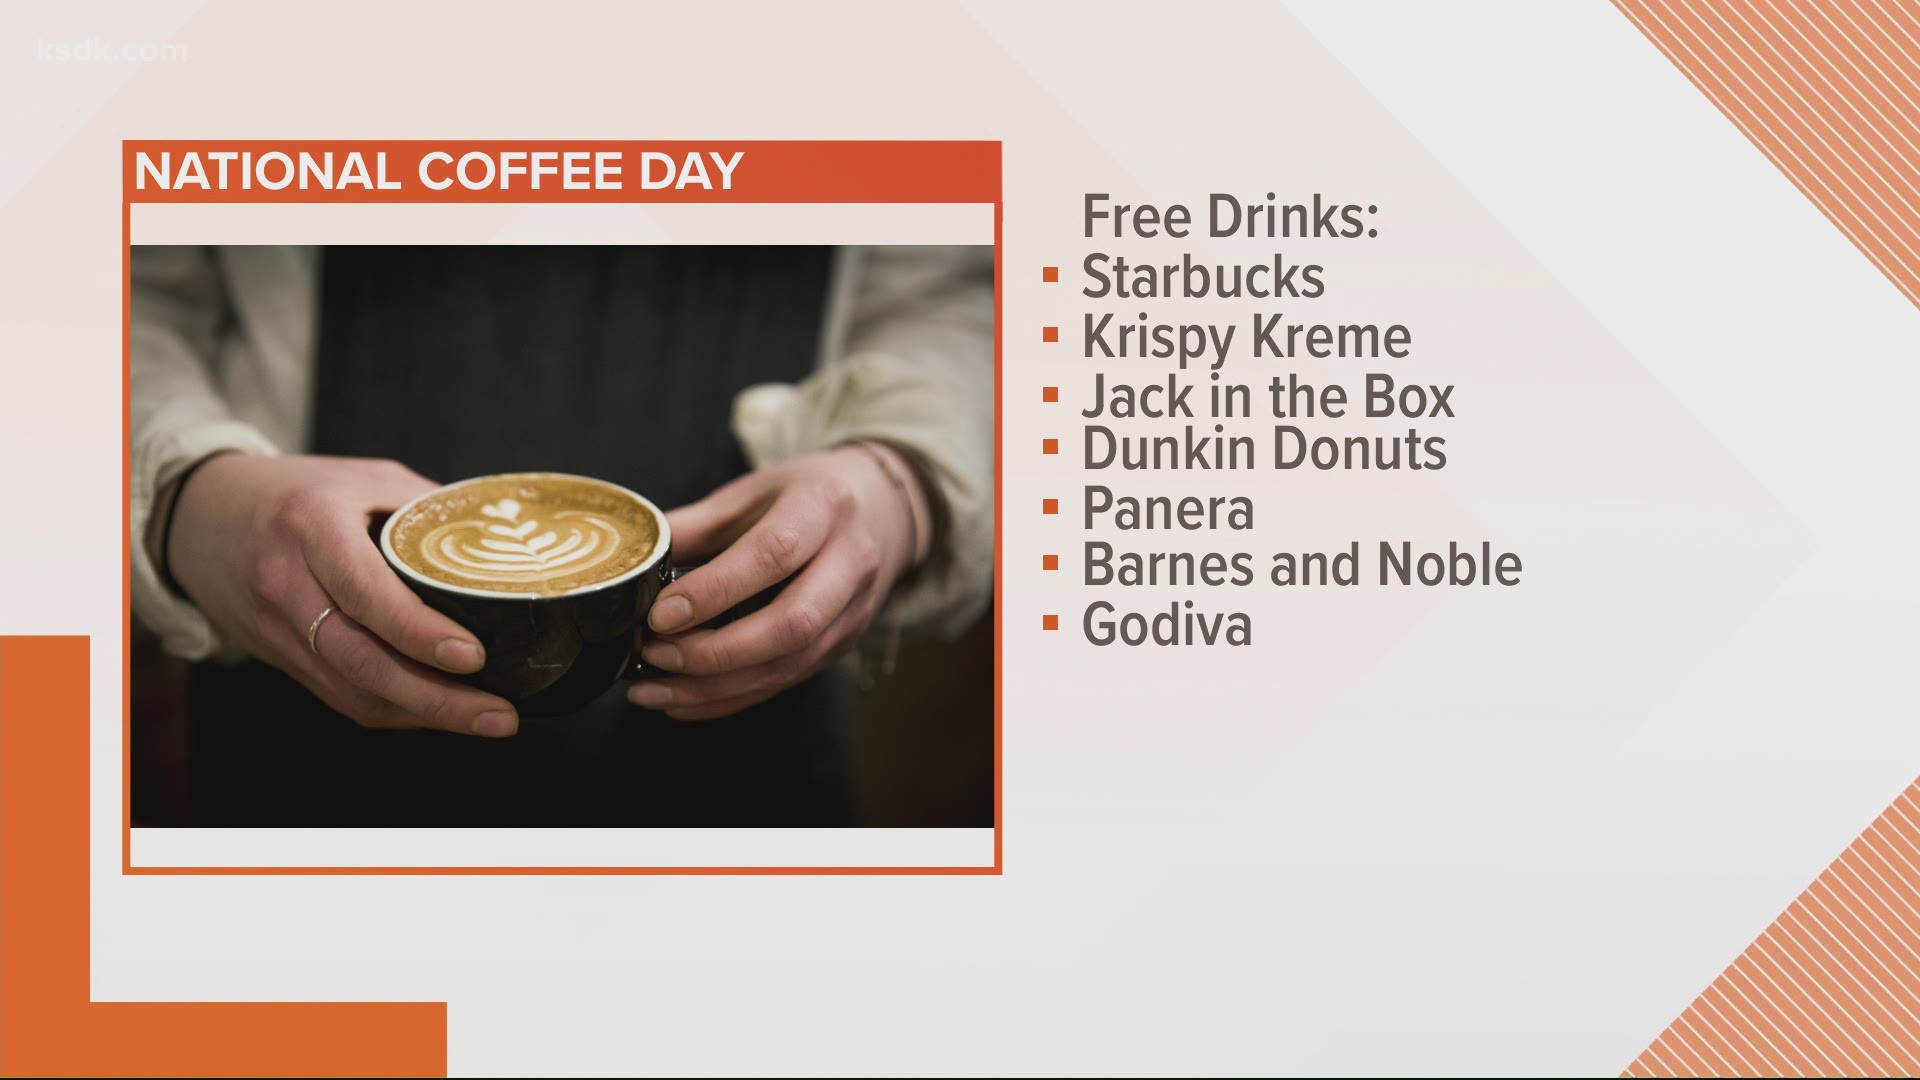 Tuesday, Sept. 29 is National Coffee Day. We have all the places where you can score a free cup of joe